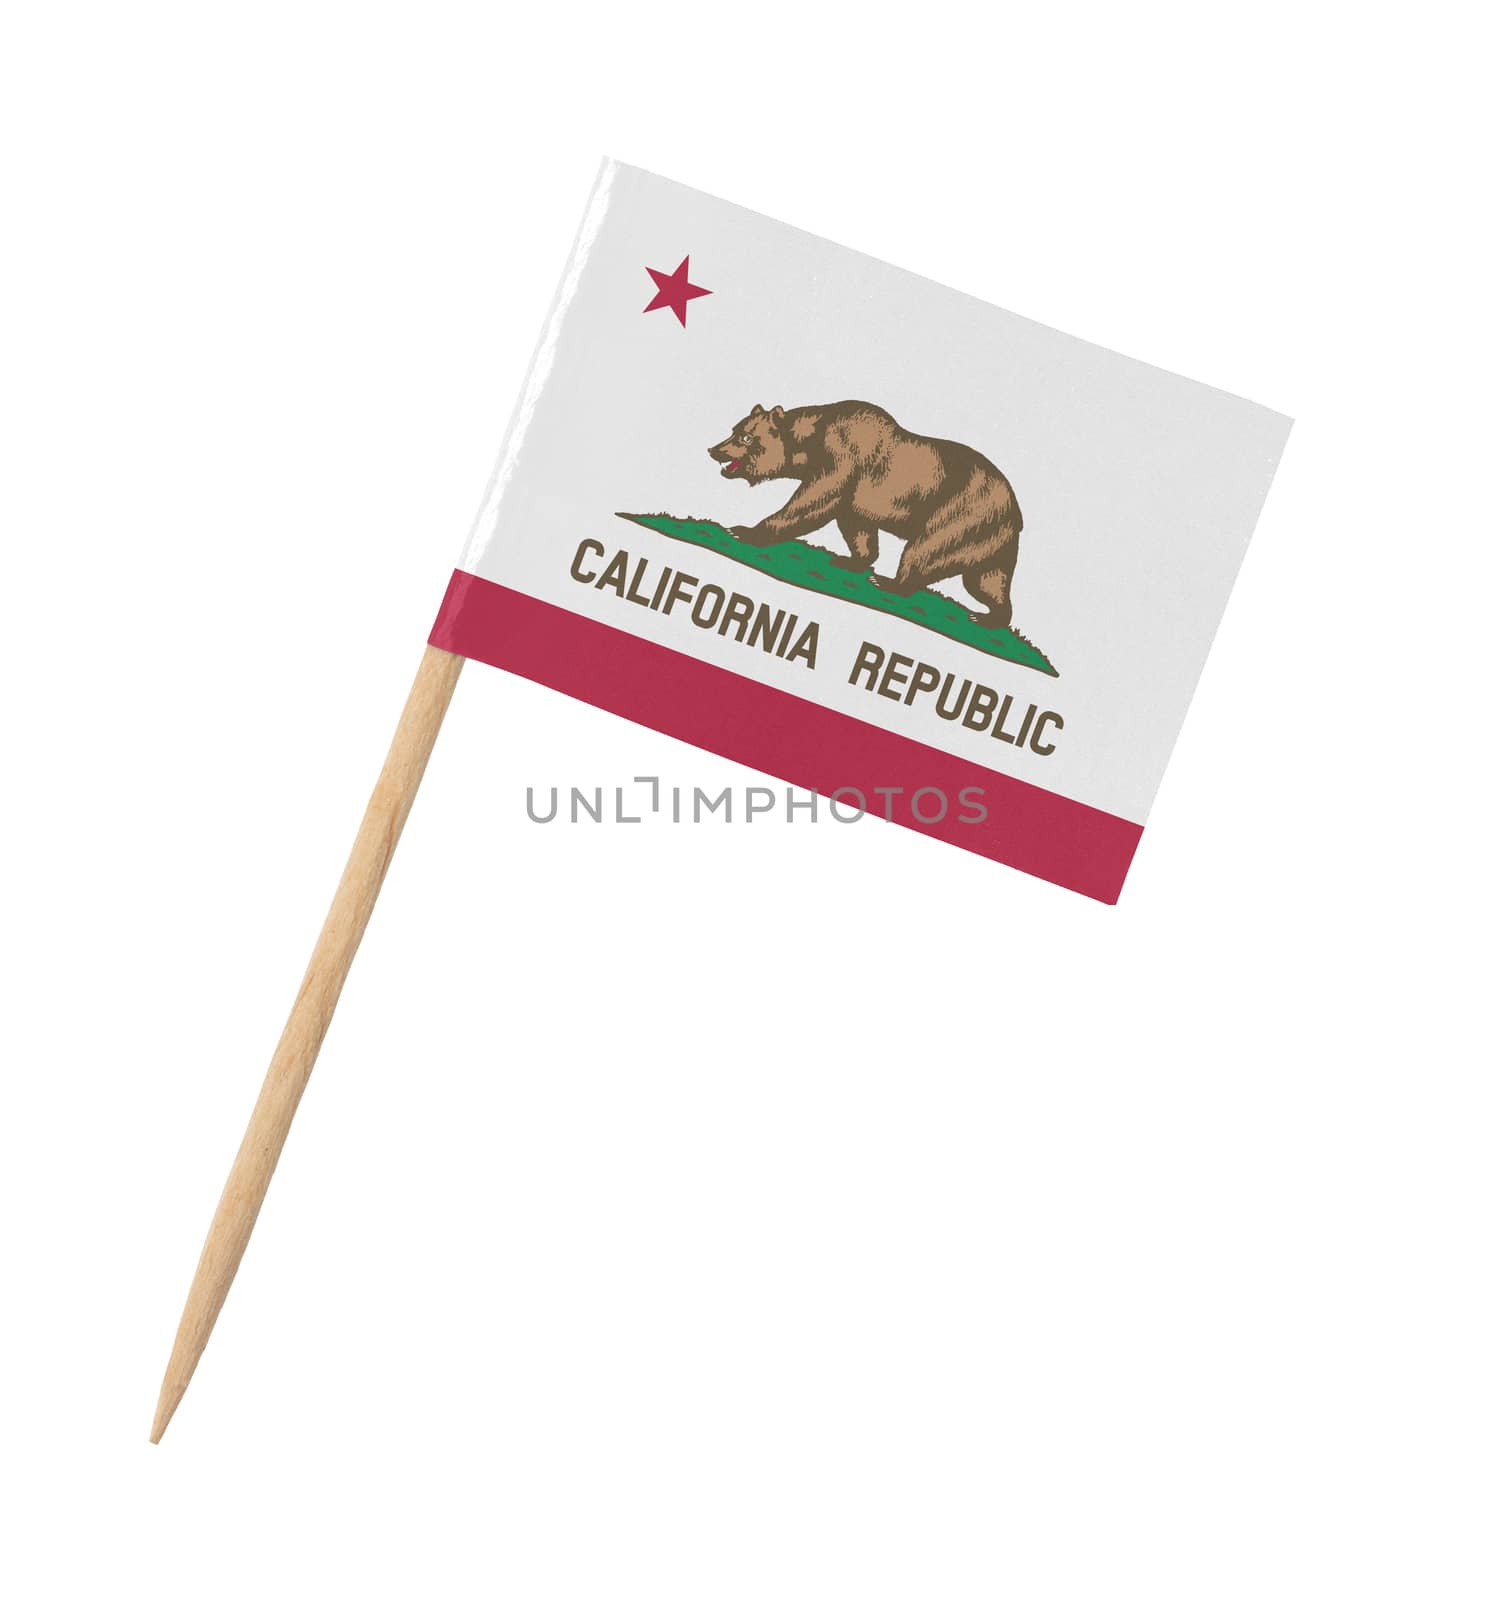 Small paper US-state flag on wooden stick - California - Isolated on white